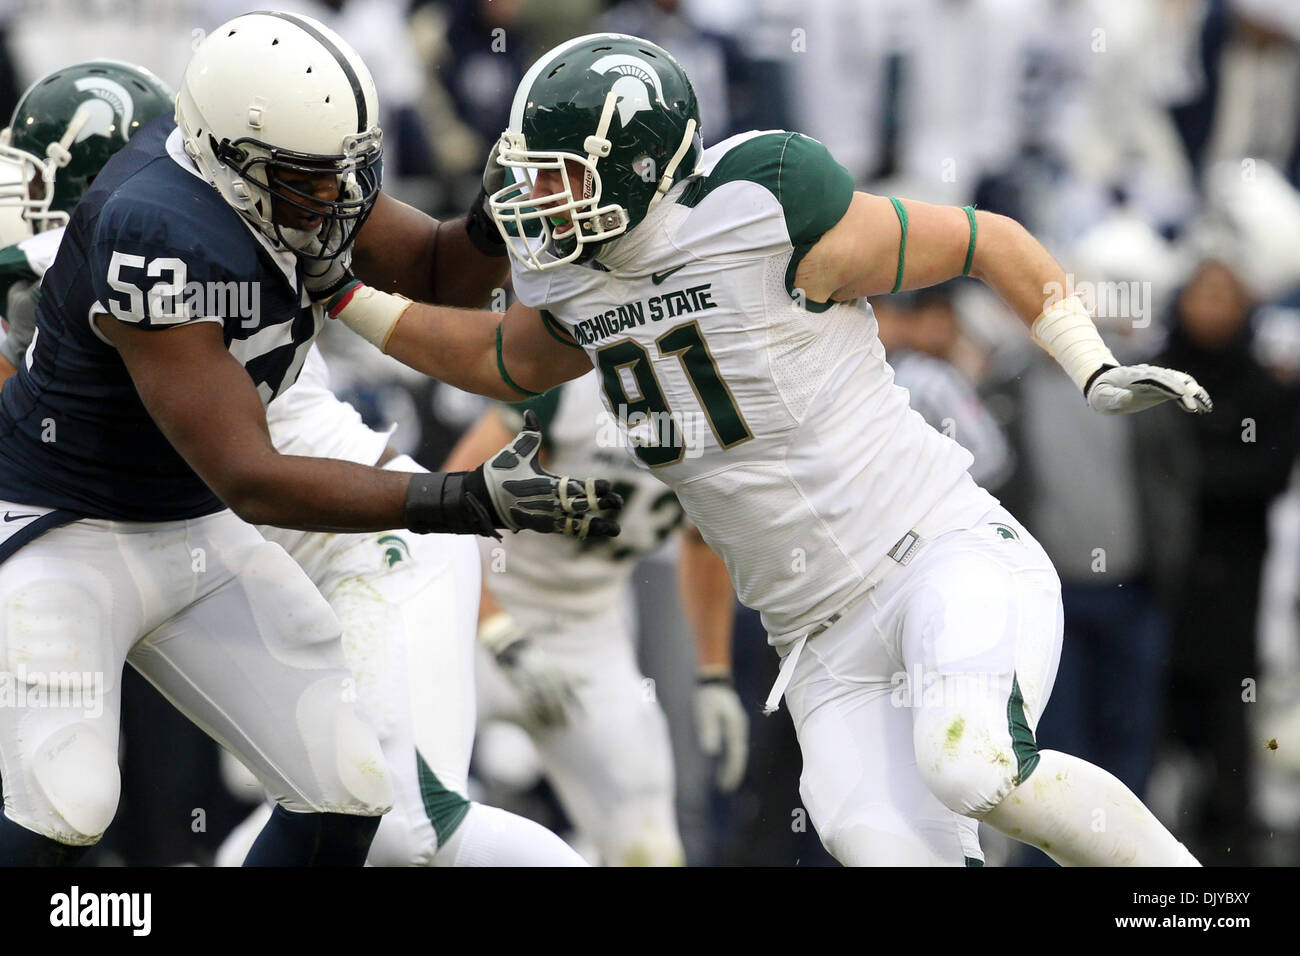 Nov. 27, 2010 - University Park, Pennsylvania, United States of America - Penn State Nittany Lions offensive tackle Chimaeze Okoli (52) and Michigan State Spartans defensive end Tyler Hoover (91) in action during a game at Beaver Stadium in University Park, Pennsylvania. (Credit Image: © Alex Cena/Southcreek Global/ZUMAPRESS.com) Stock Photo